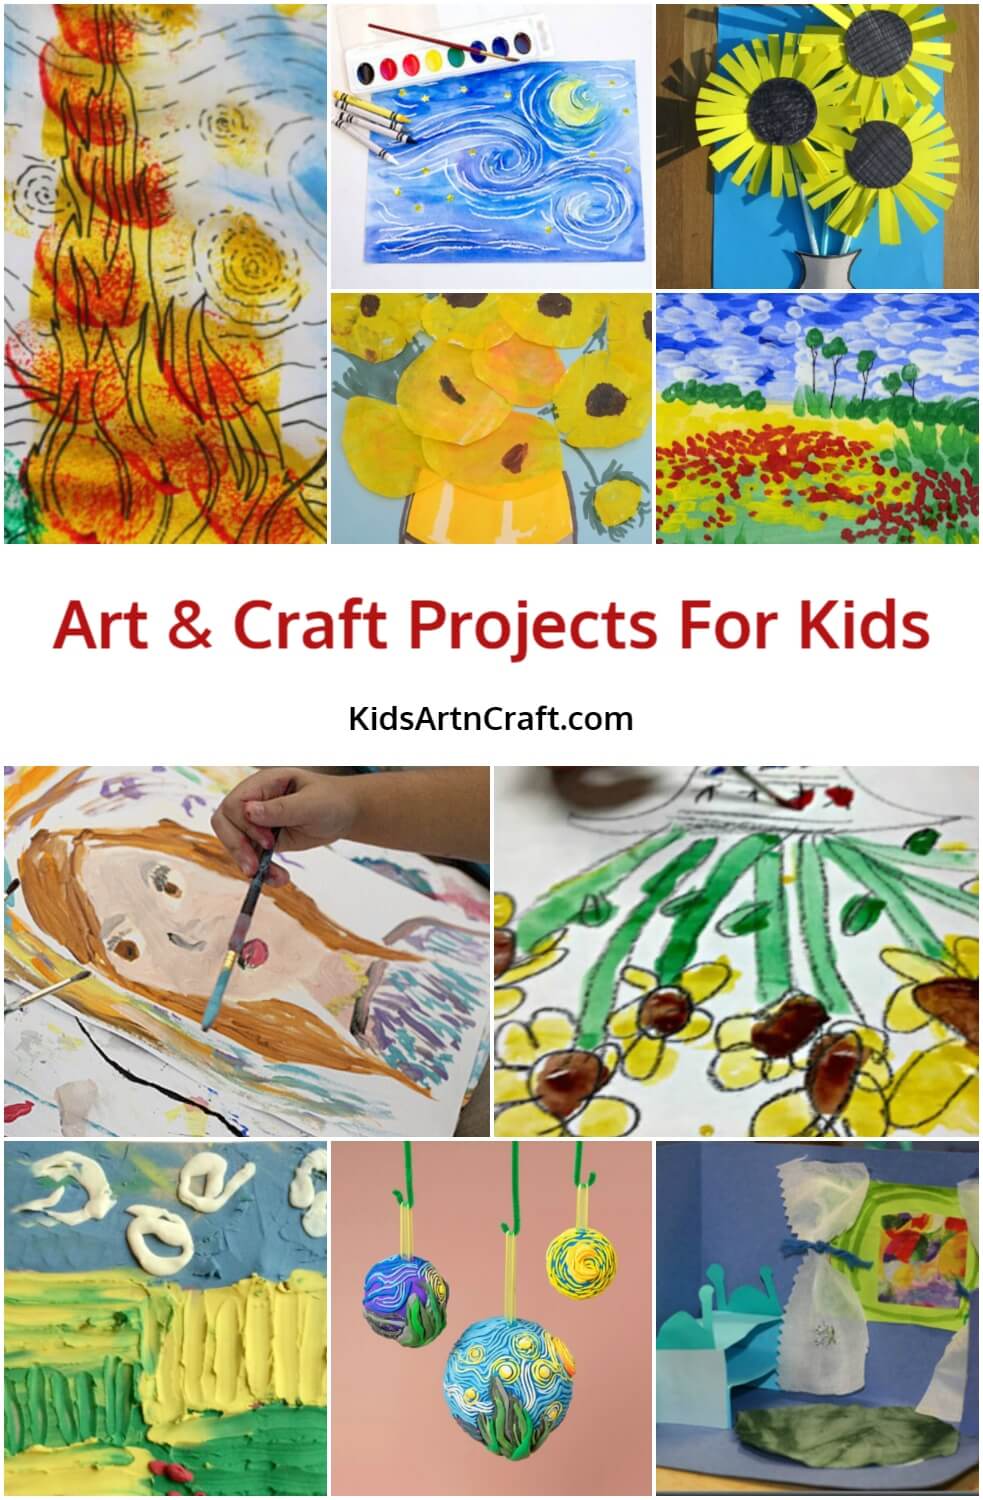 Art & Craft Projects For Kids To Inspire Creativity